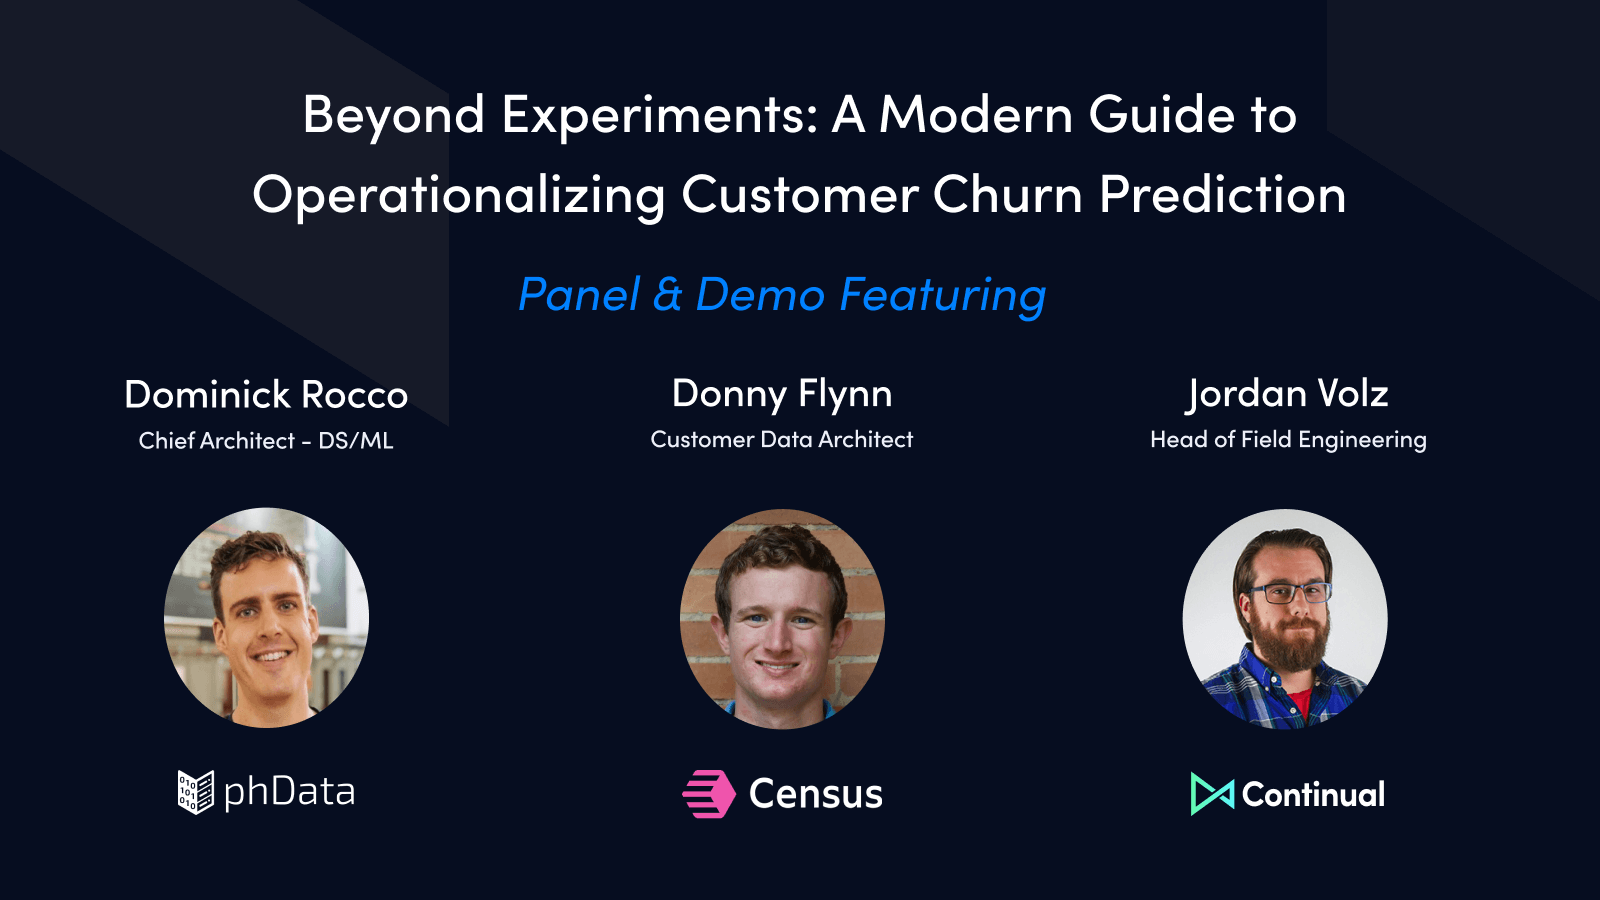 A Modern Guide to Operationalizing Customer Churn Prediction